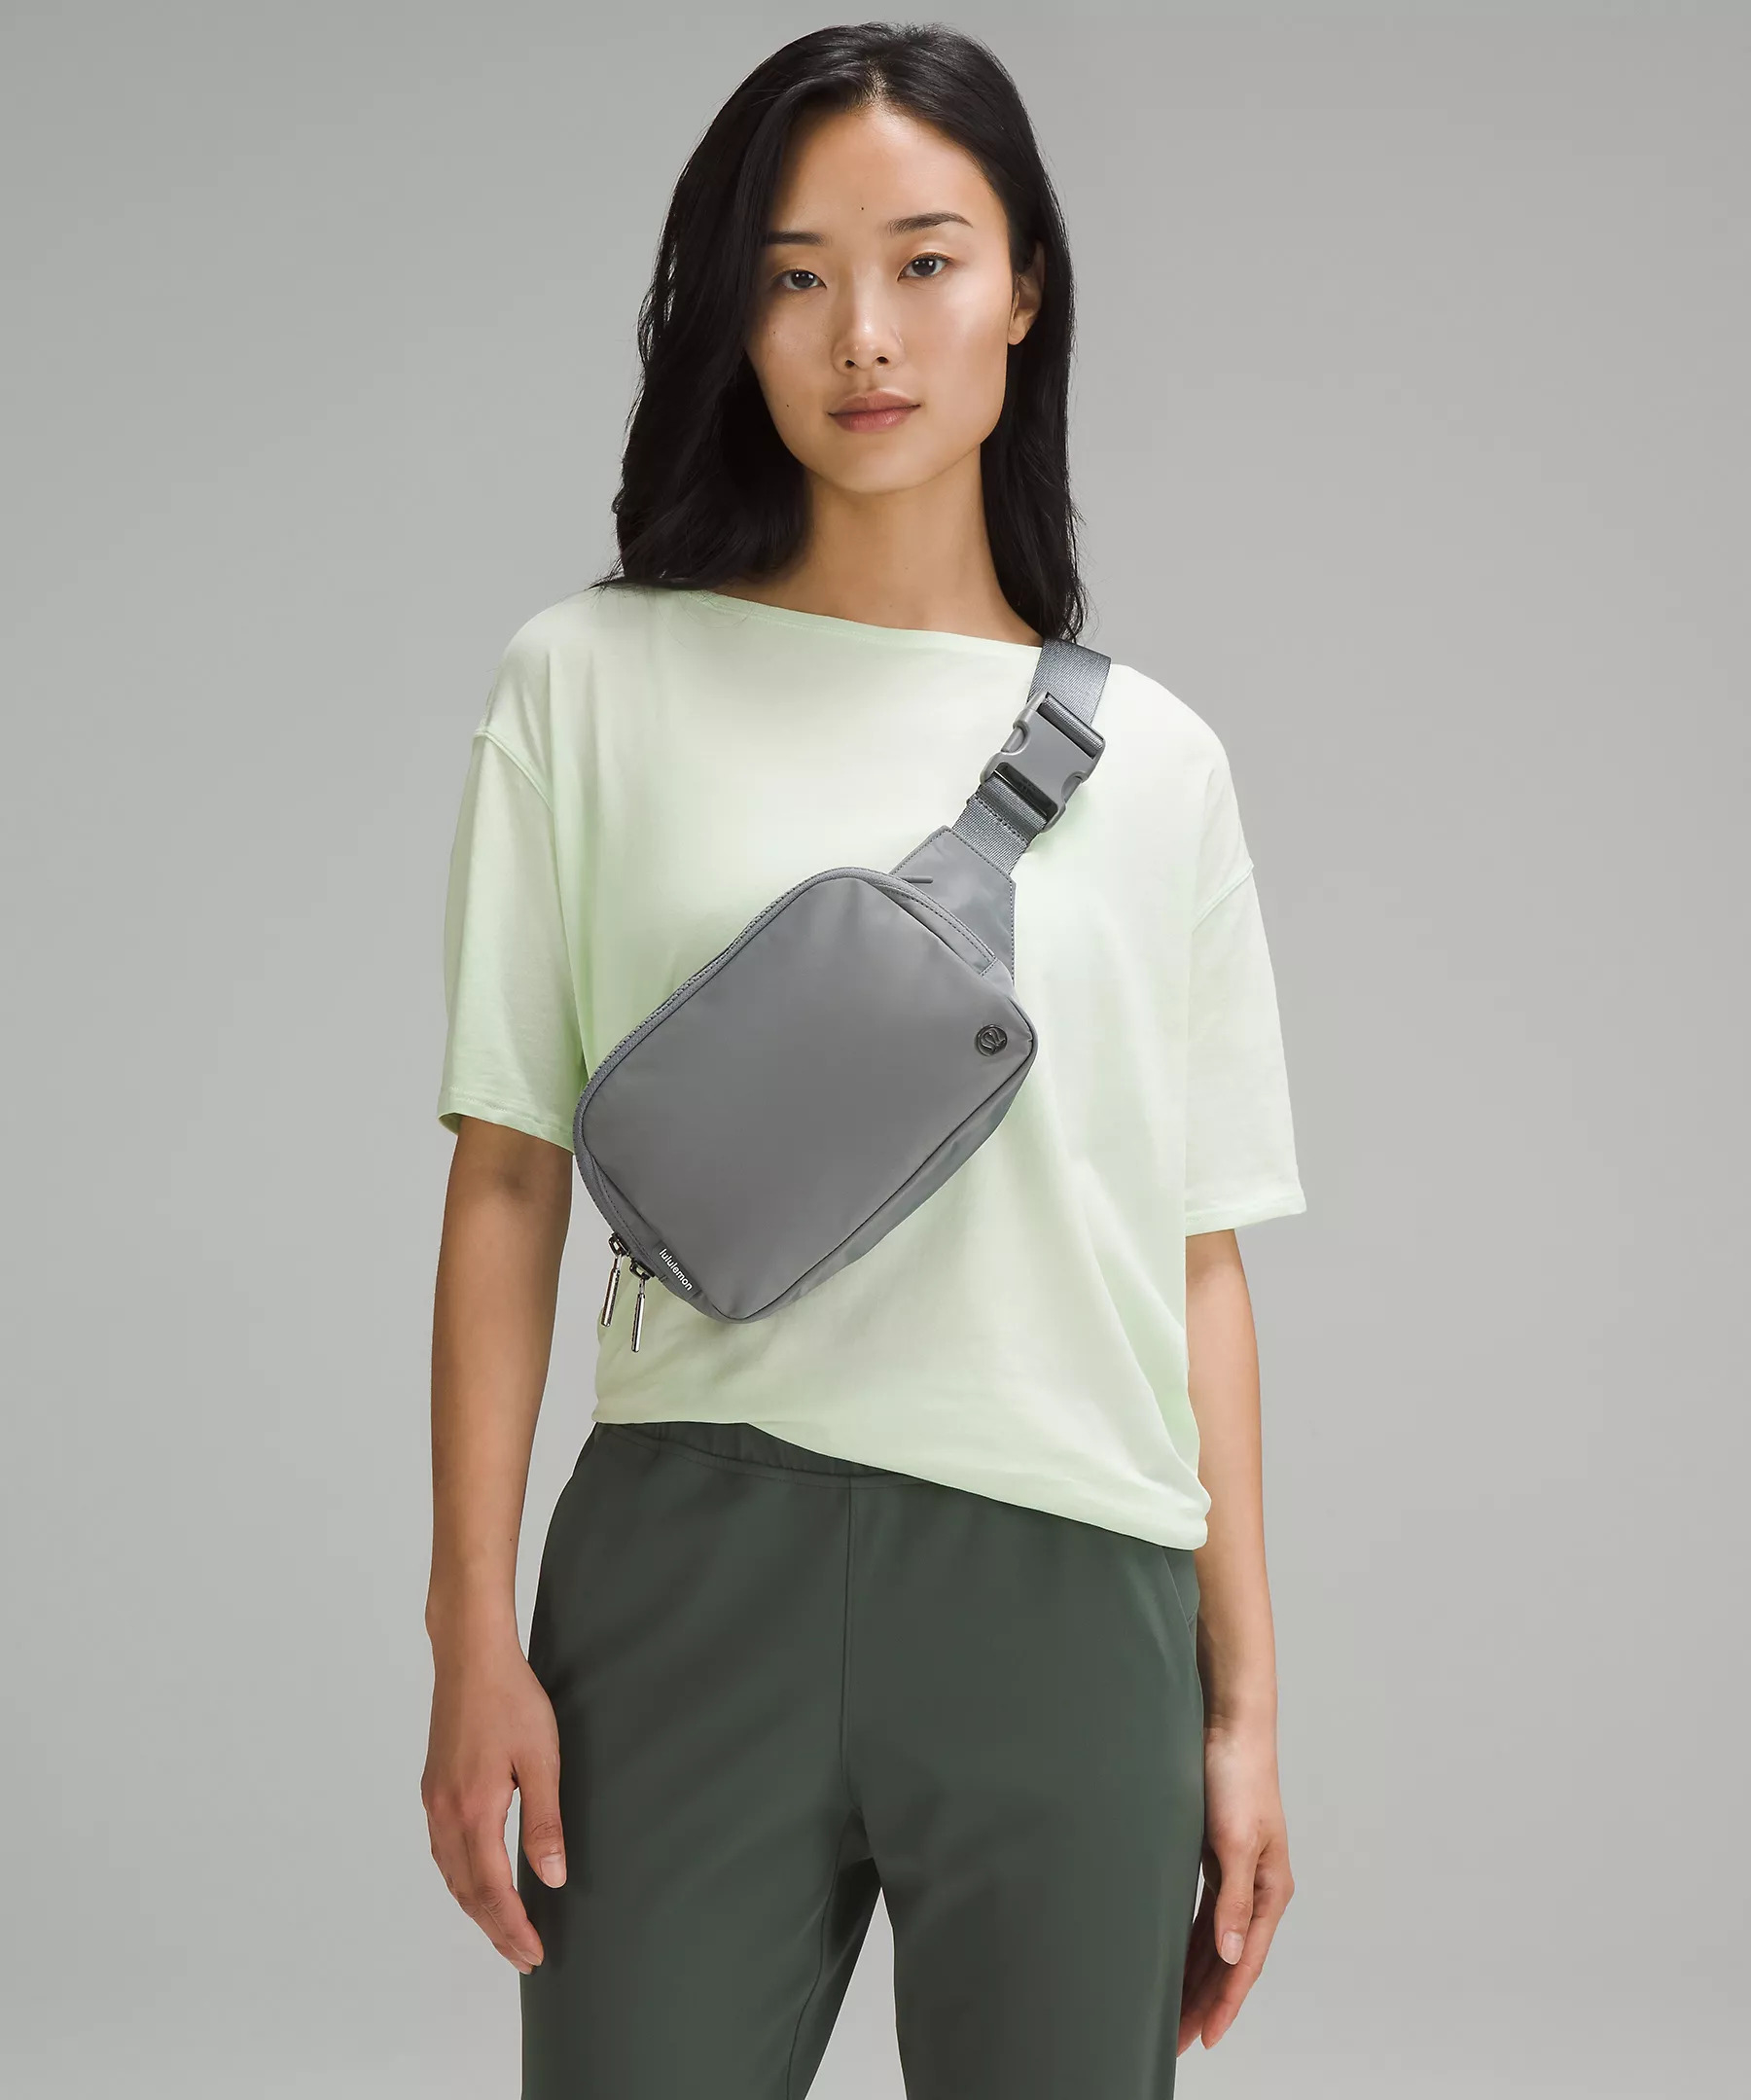 A model wearing the flat, rectangular shaped bag across the chest